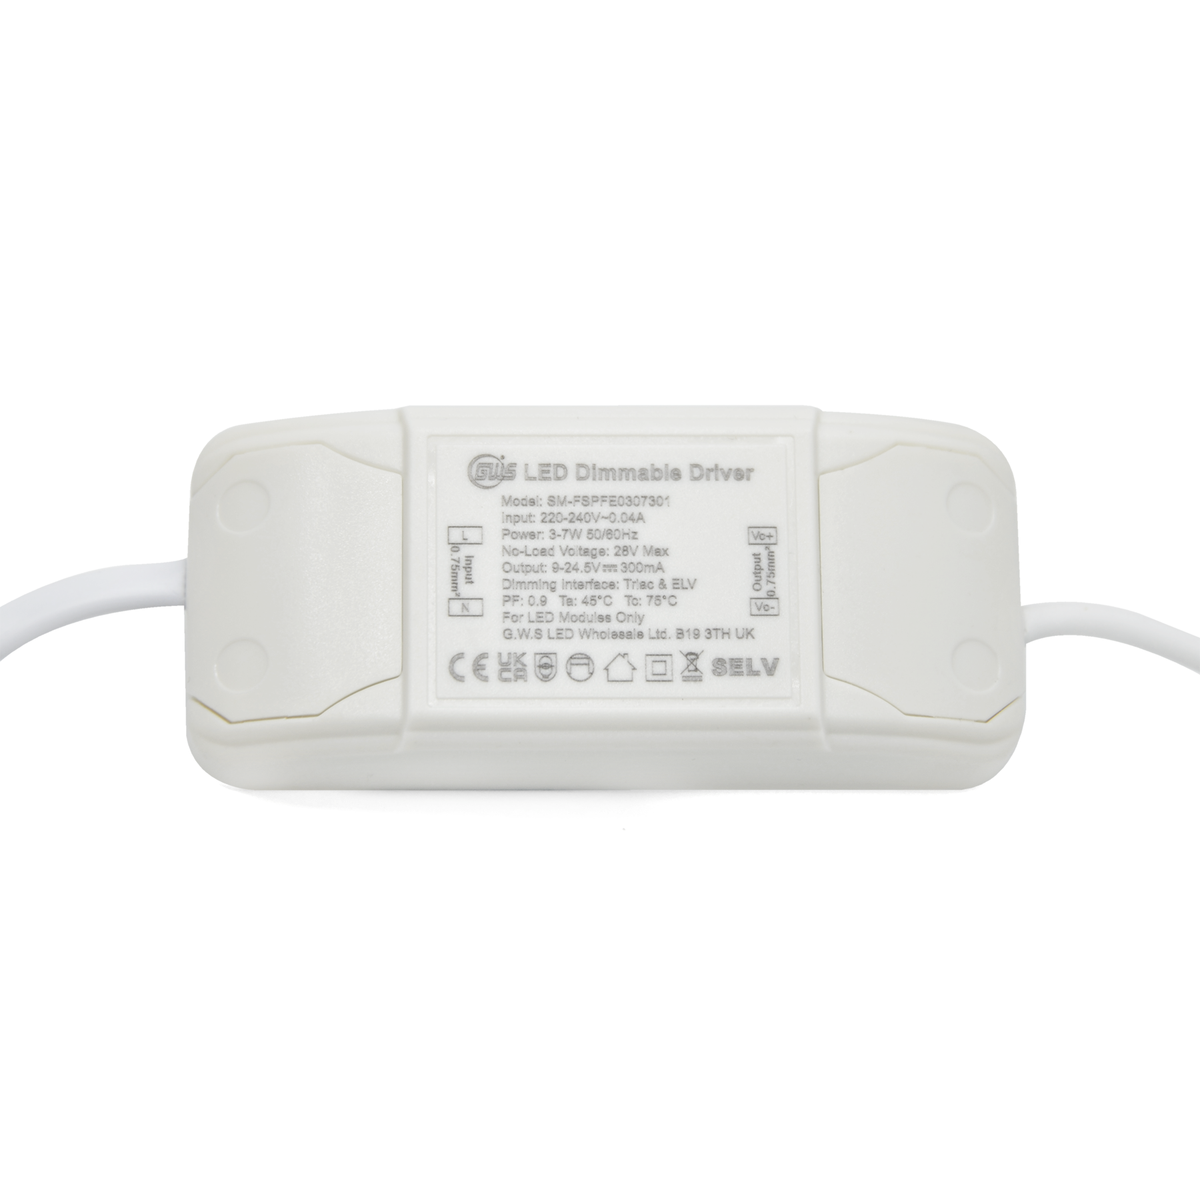 G.W.S LED Wholesale LED Drivers/LED Power Supplies Triac Constant Current LED Dimmable Driver 3-7W